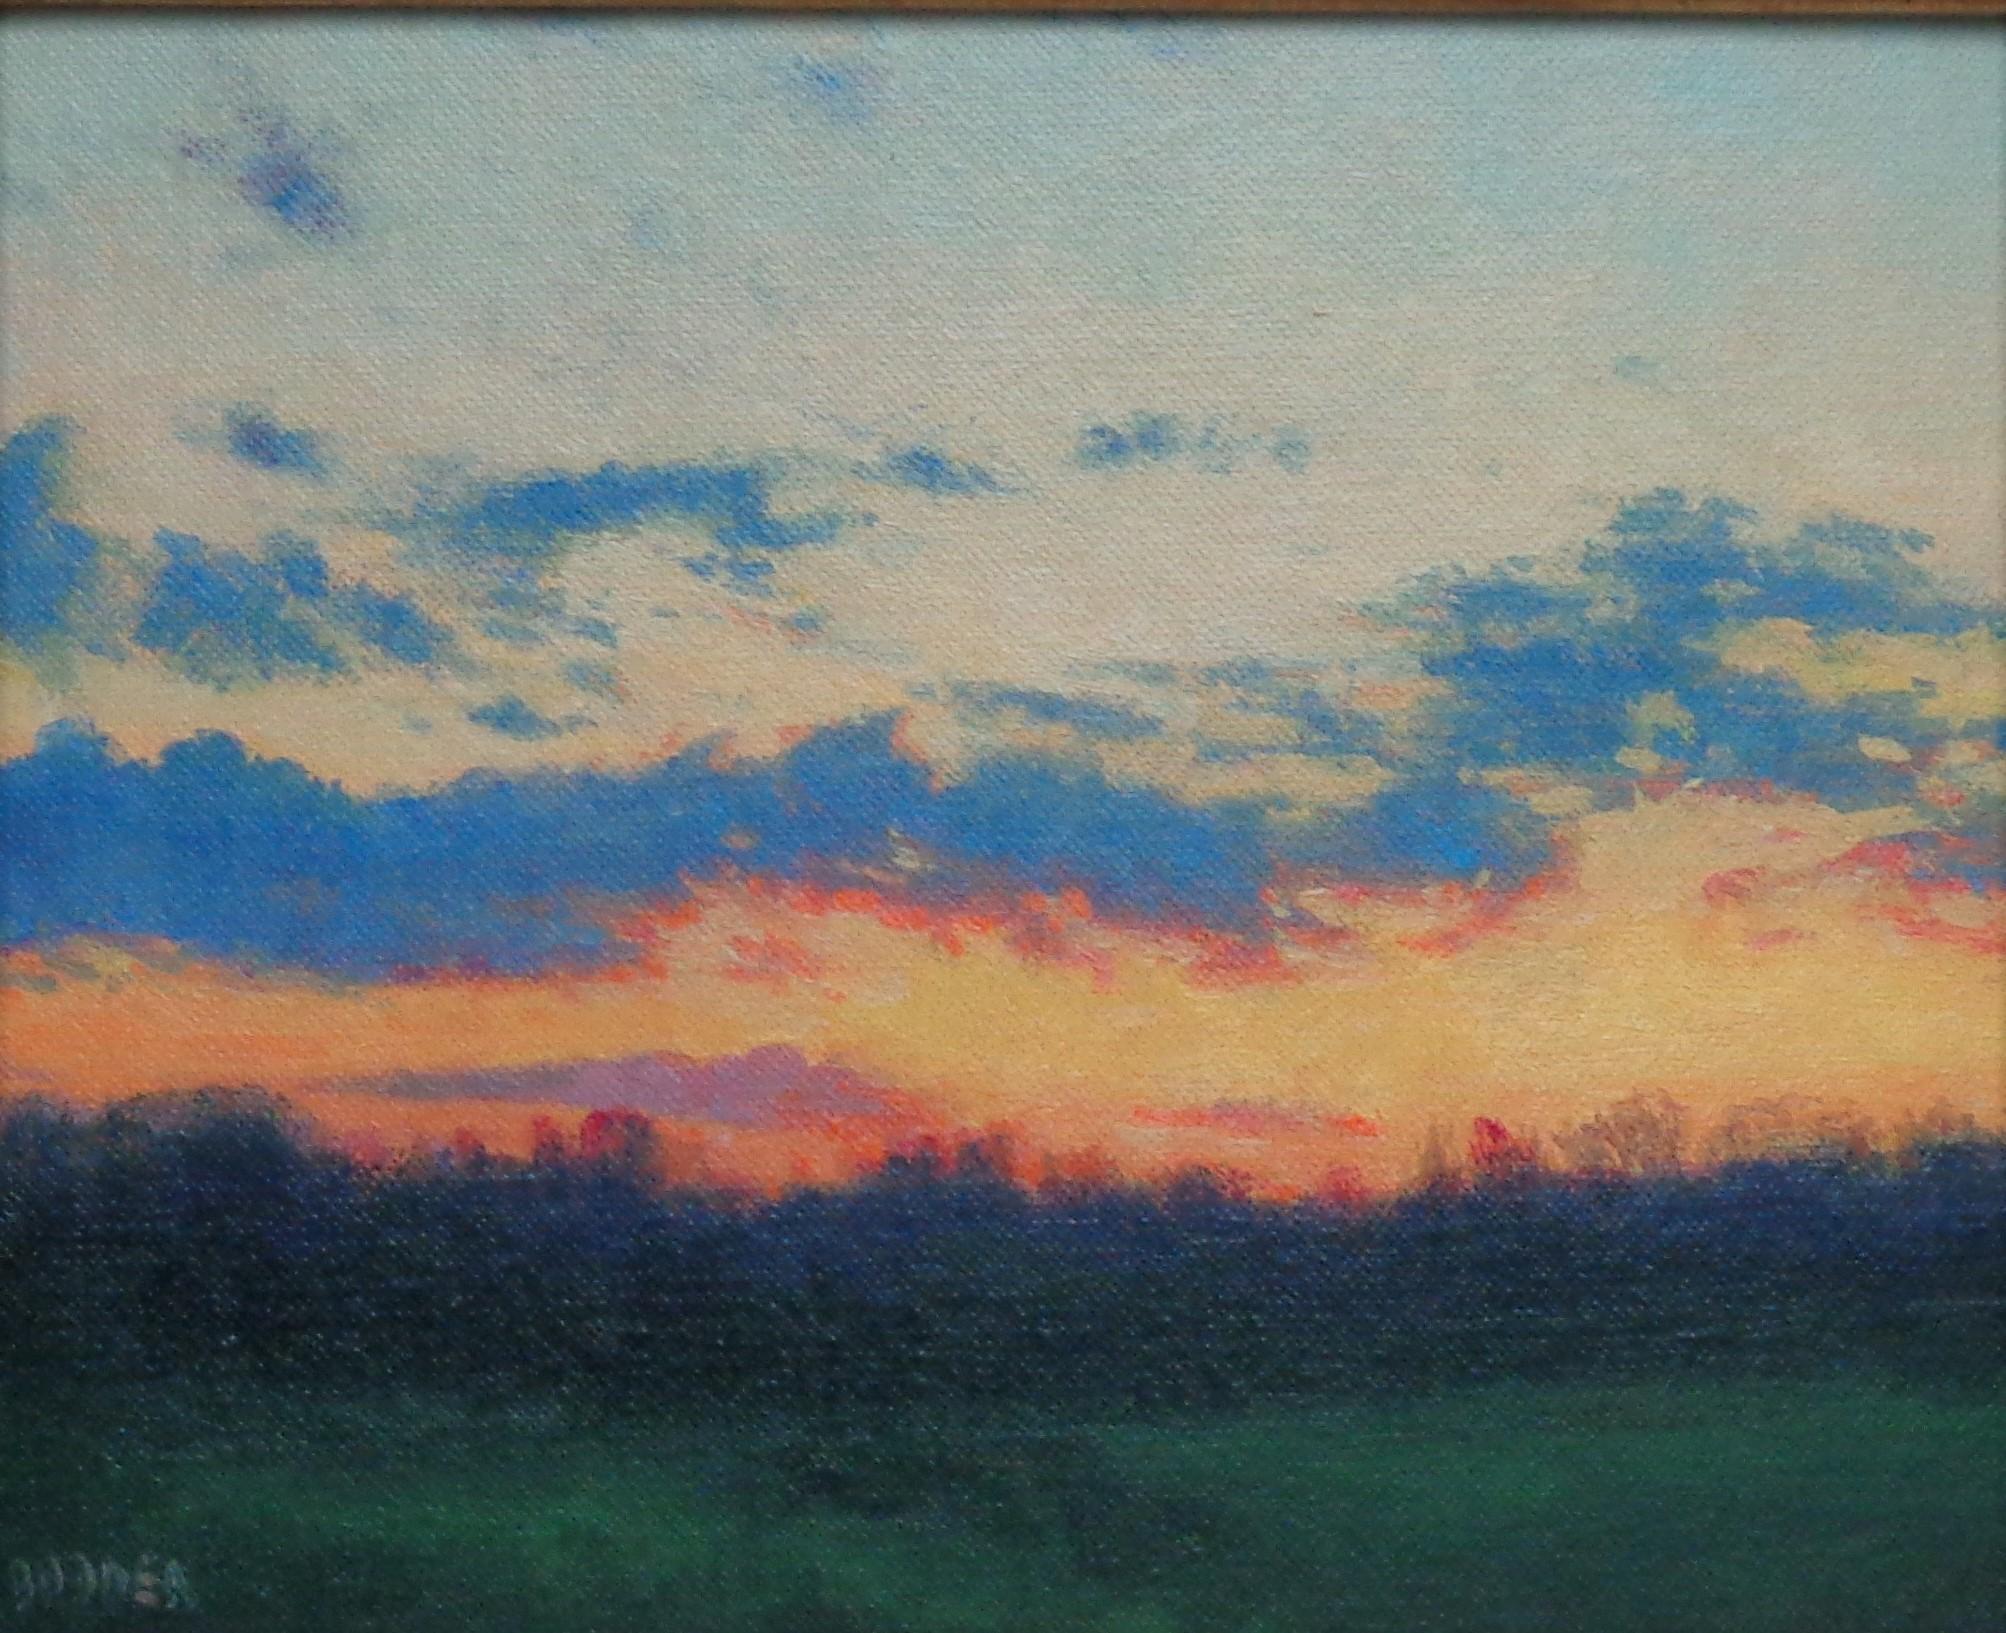 Evening Colors is a new oil on panel painting just completed in the studio. The painting exudes the rich qualities of oil paint with bright strong color, a variety of lost and found edges, visible brush work and a concentration on a beautiful